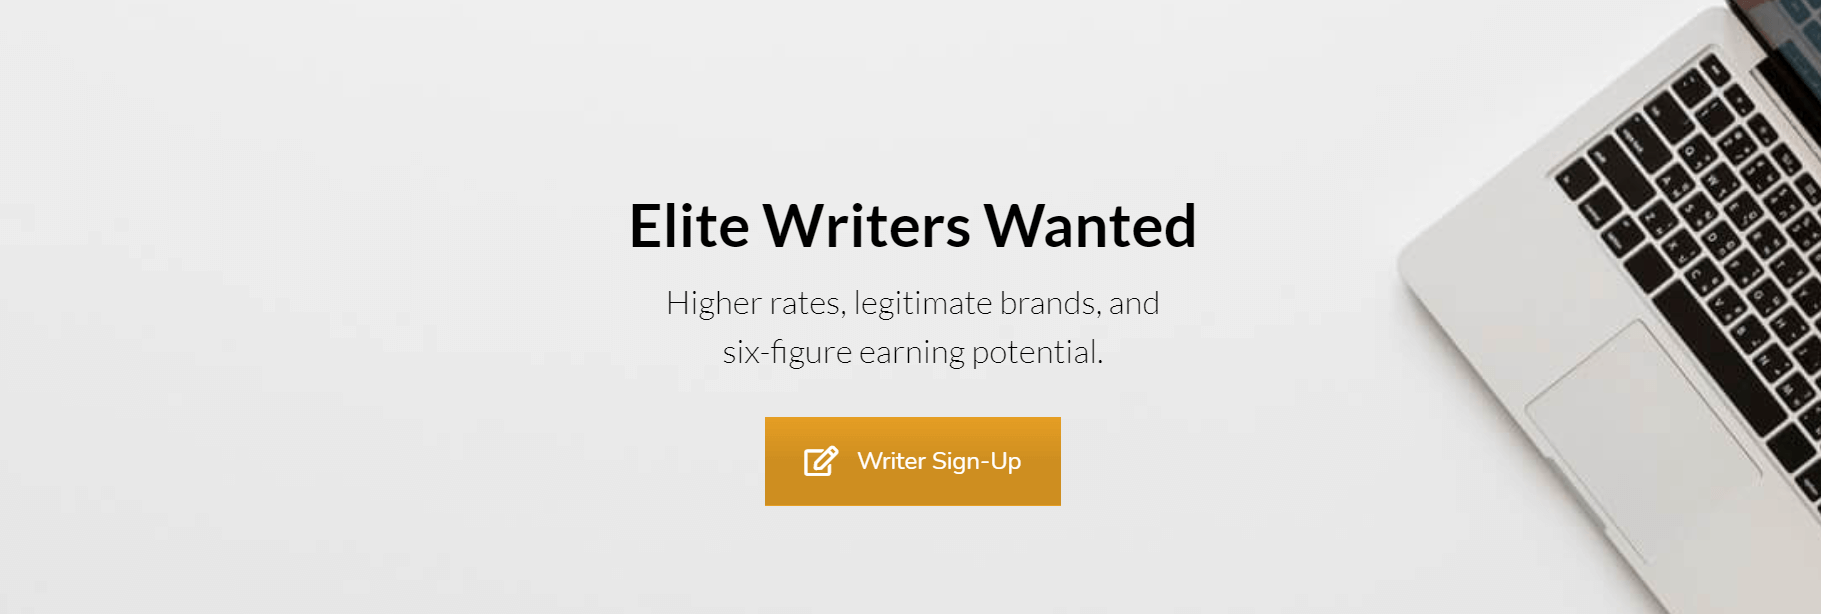 Elite Writers Wanted